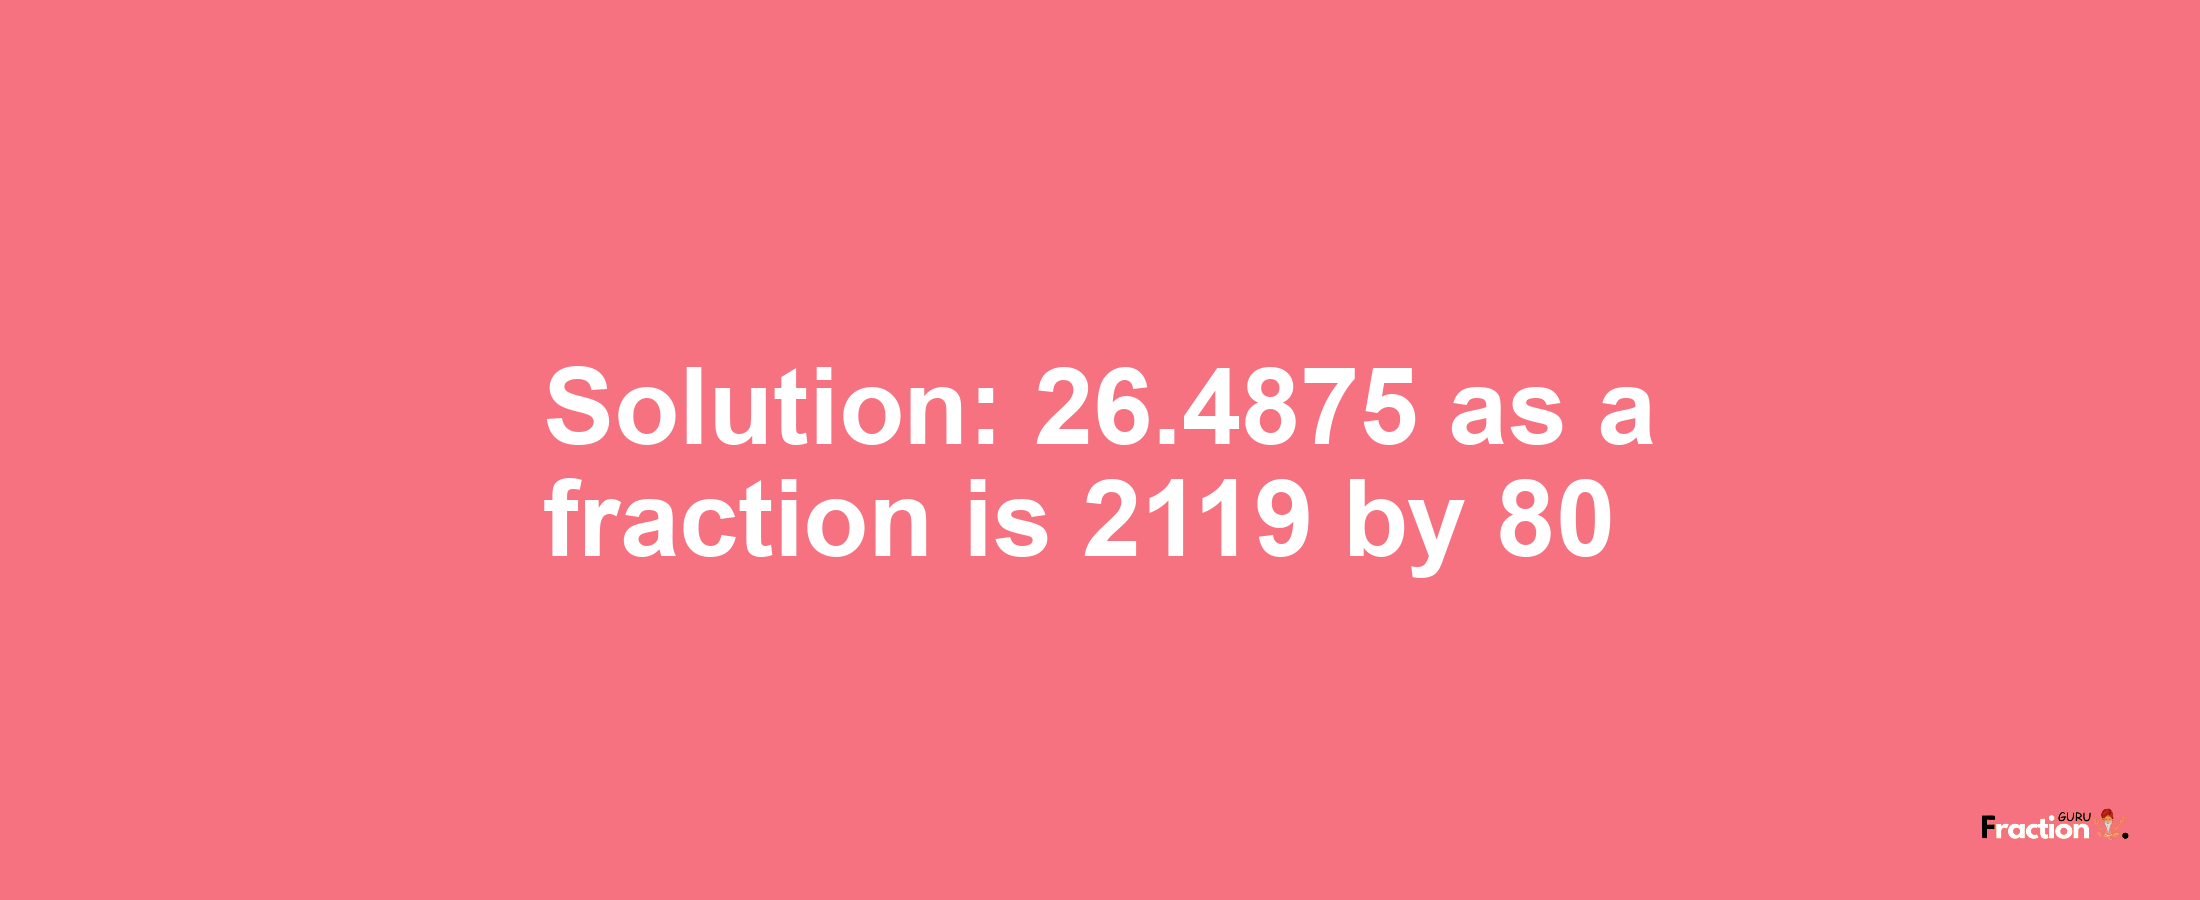 Solution:26.4875 as a fraction is 2119/80